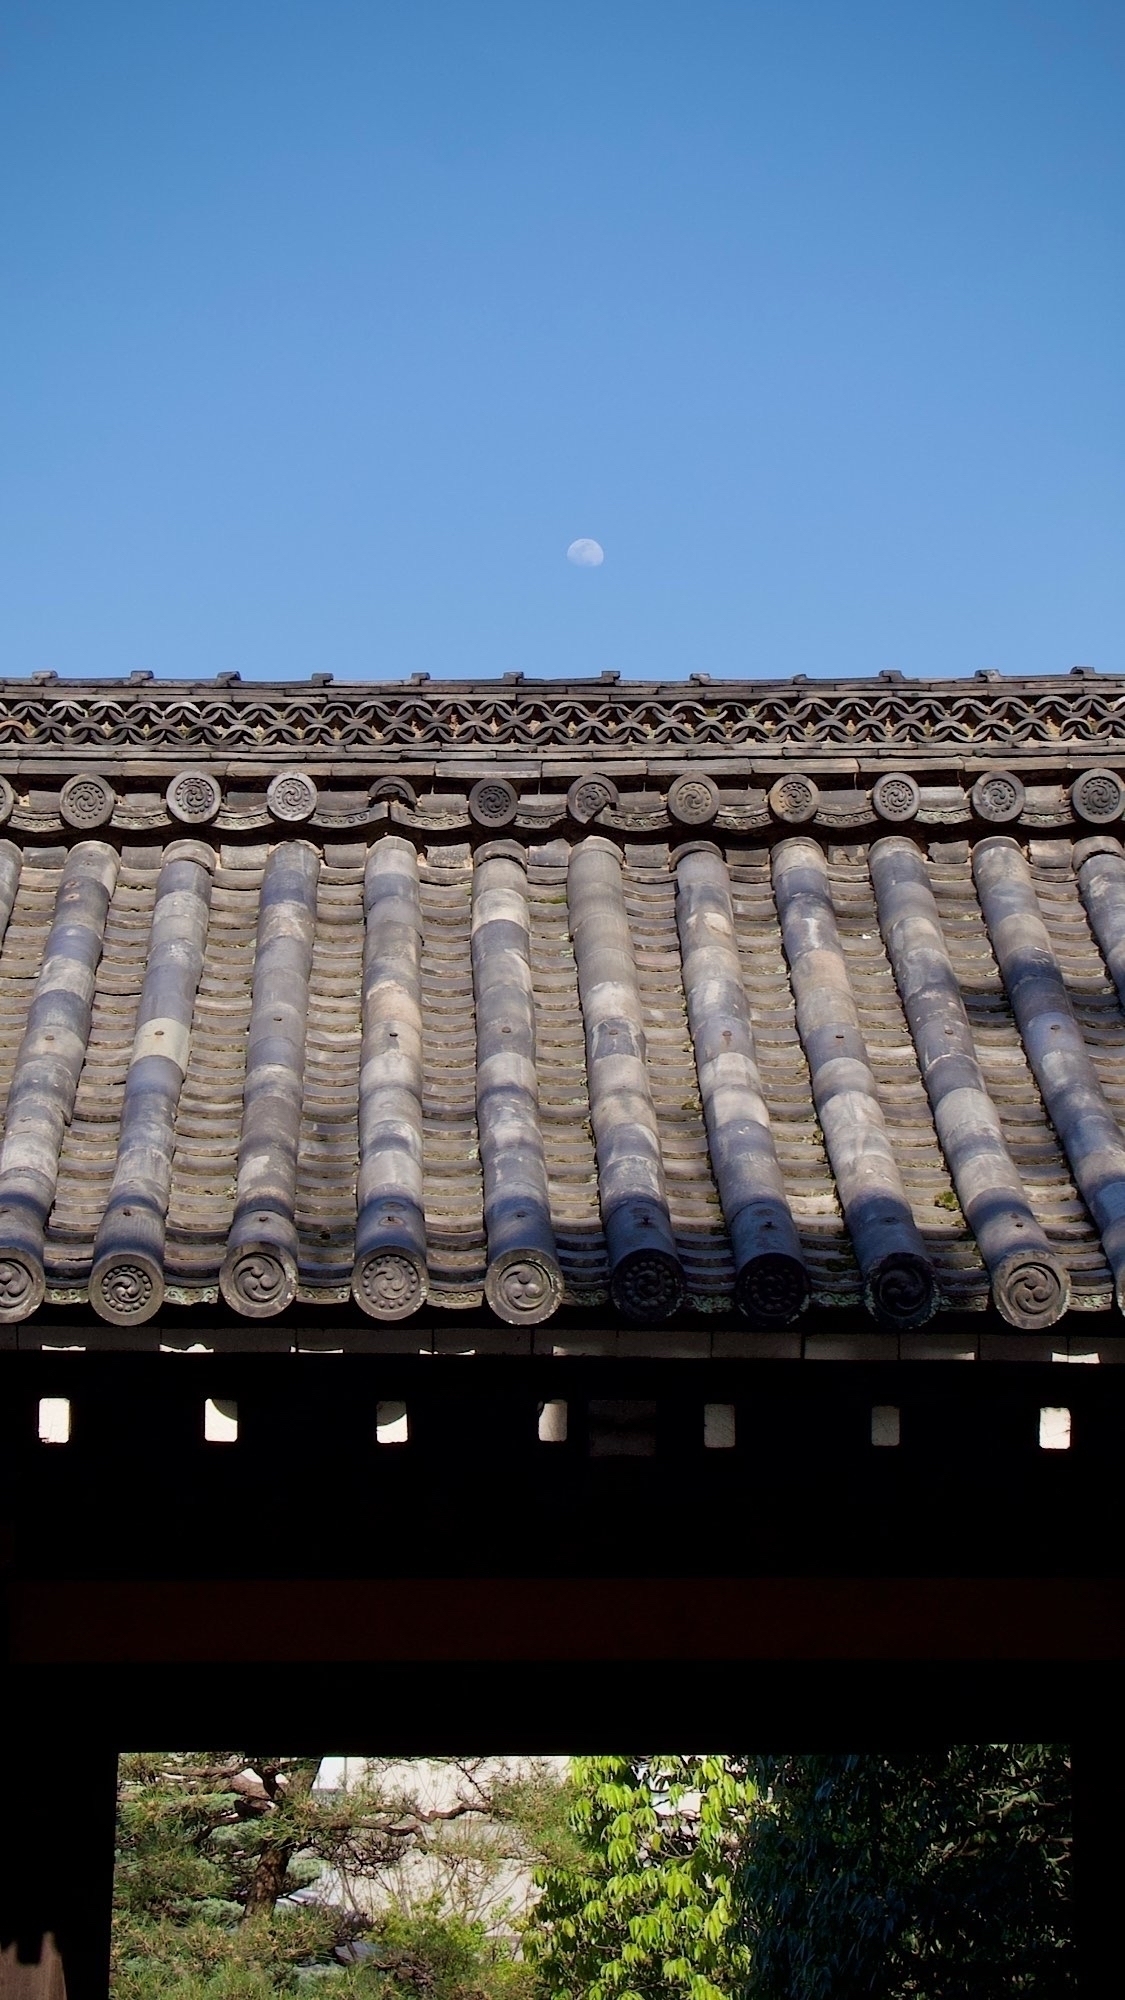 Above the roof of a temple gate the moon is visible in a perfectly clear blue sky